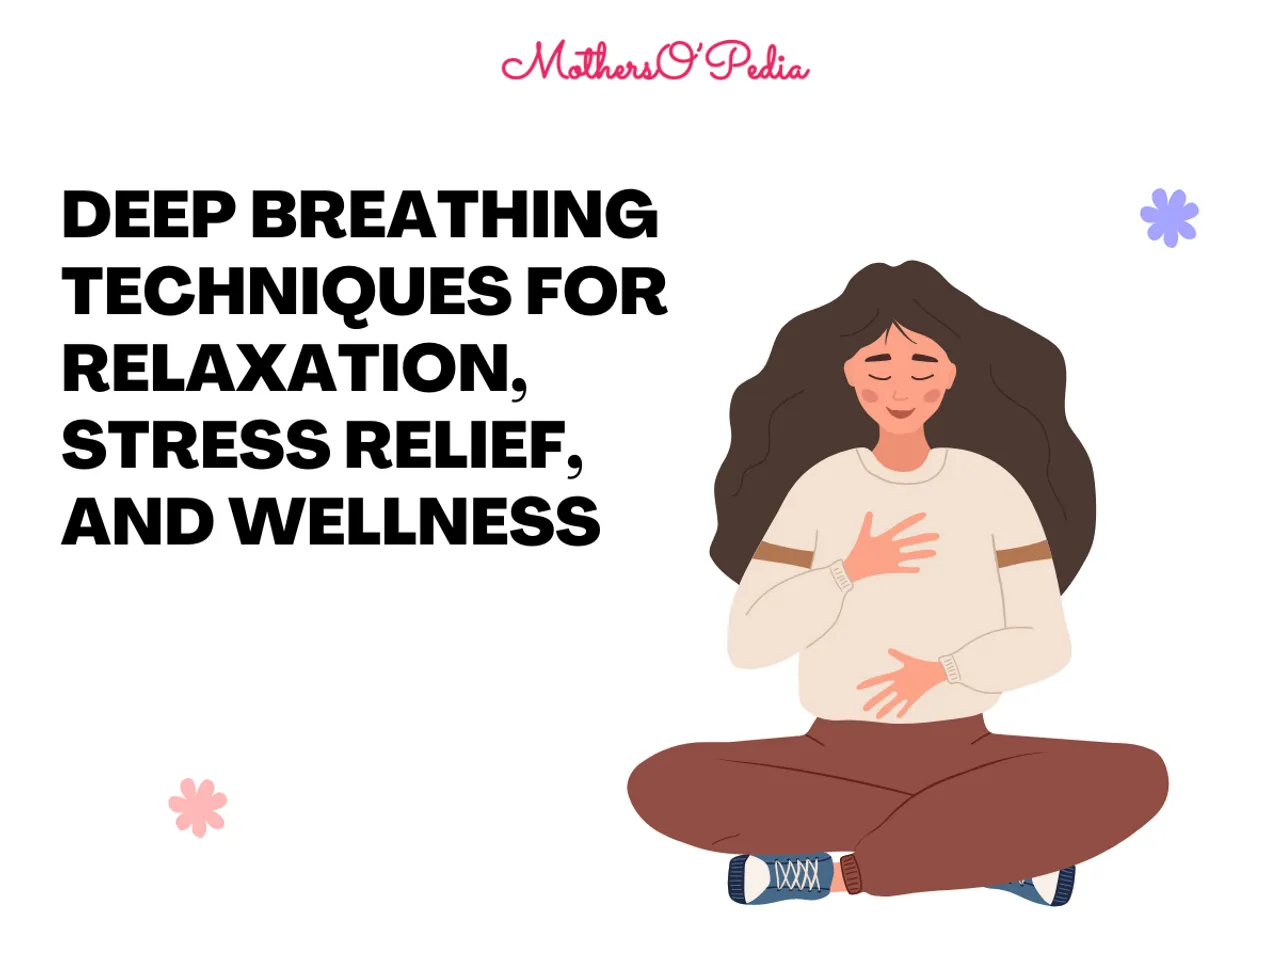 Deep Breathing Techniques for Relaxation, Stress Relief, and Wellness